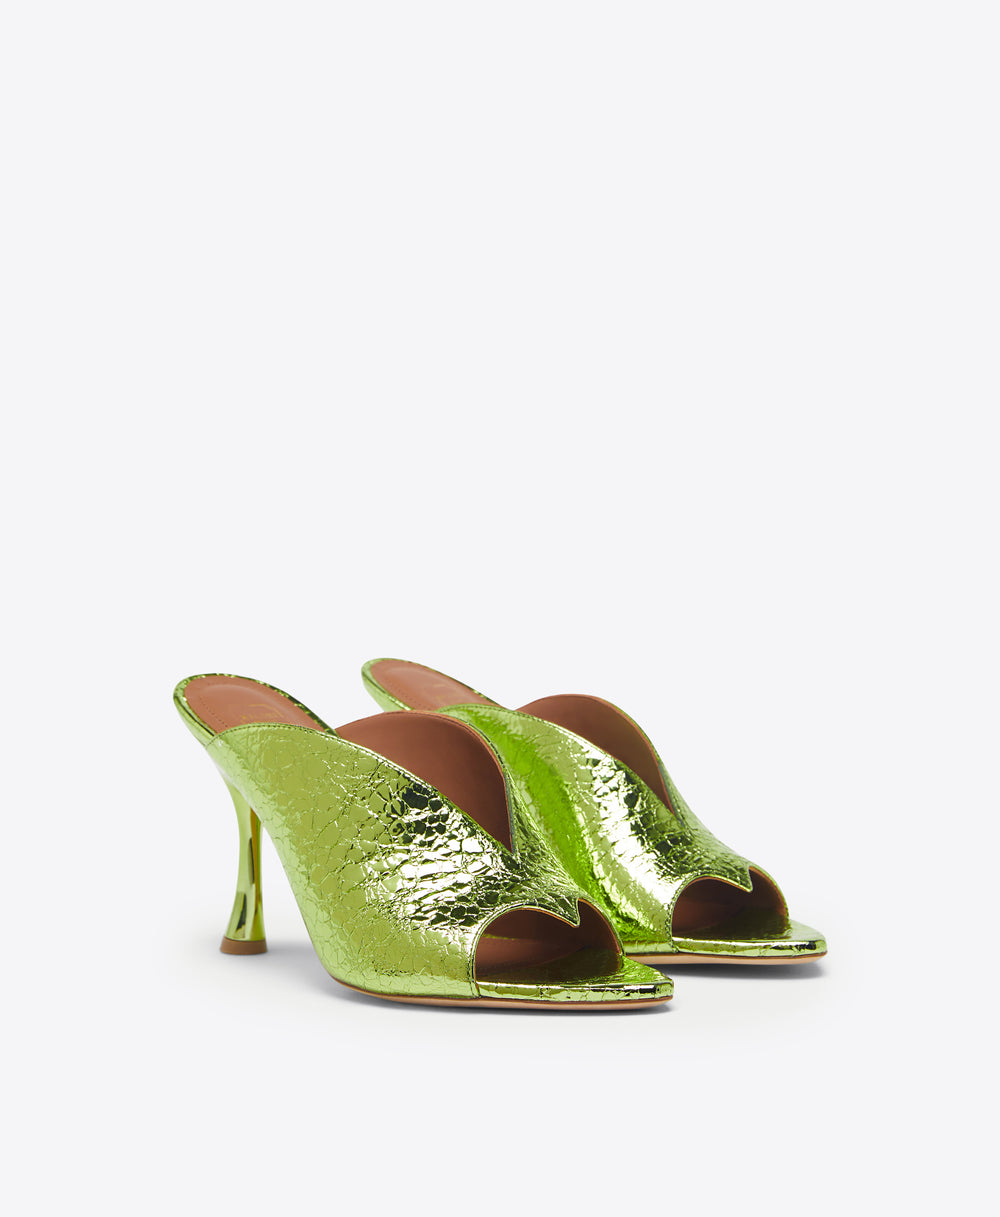 Malone Souliers Henri 90mm Green Mirror Leather Heeled Sandals 